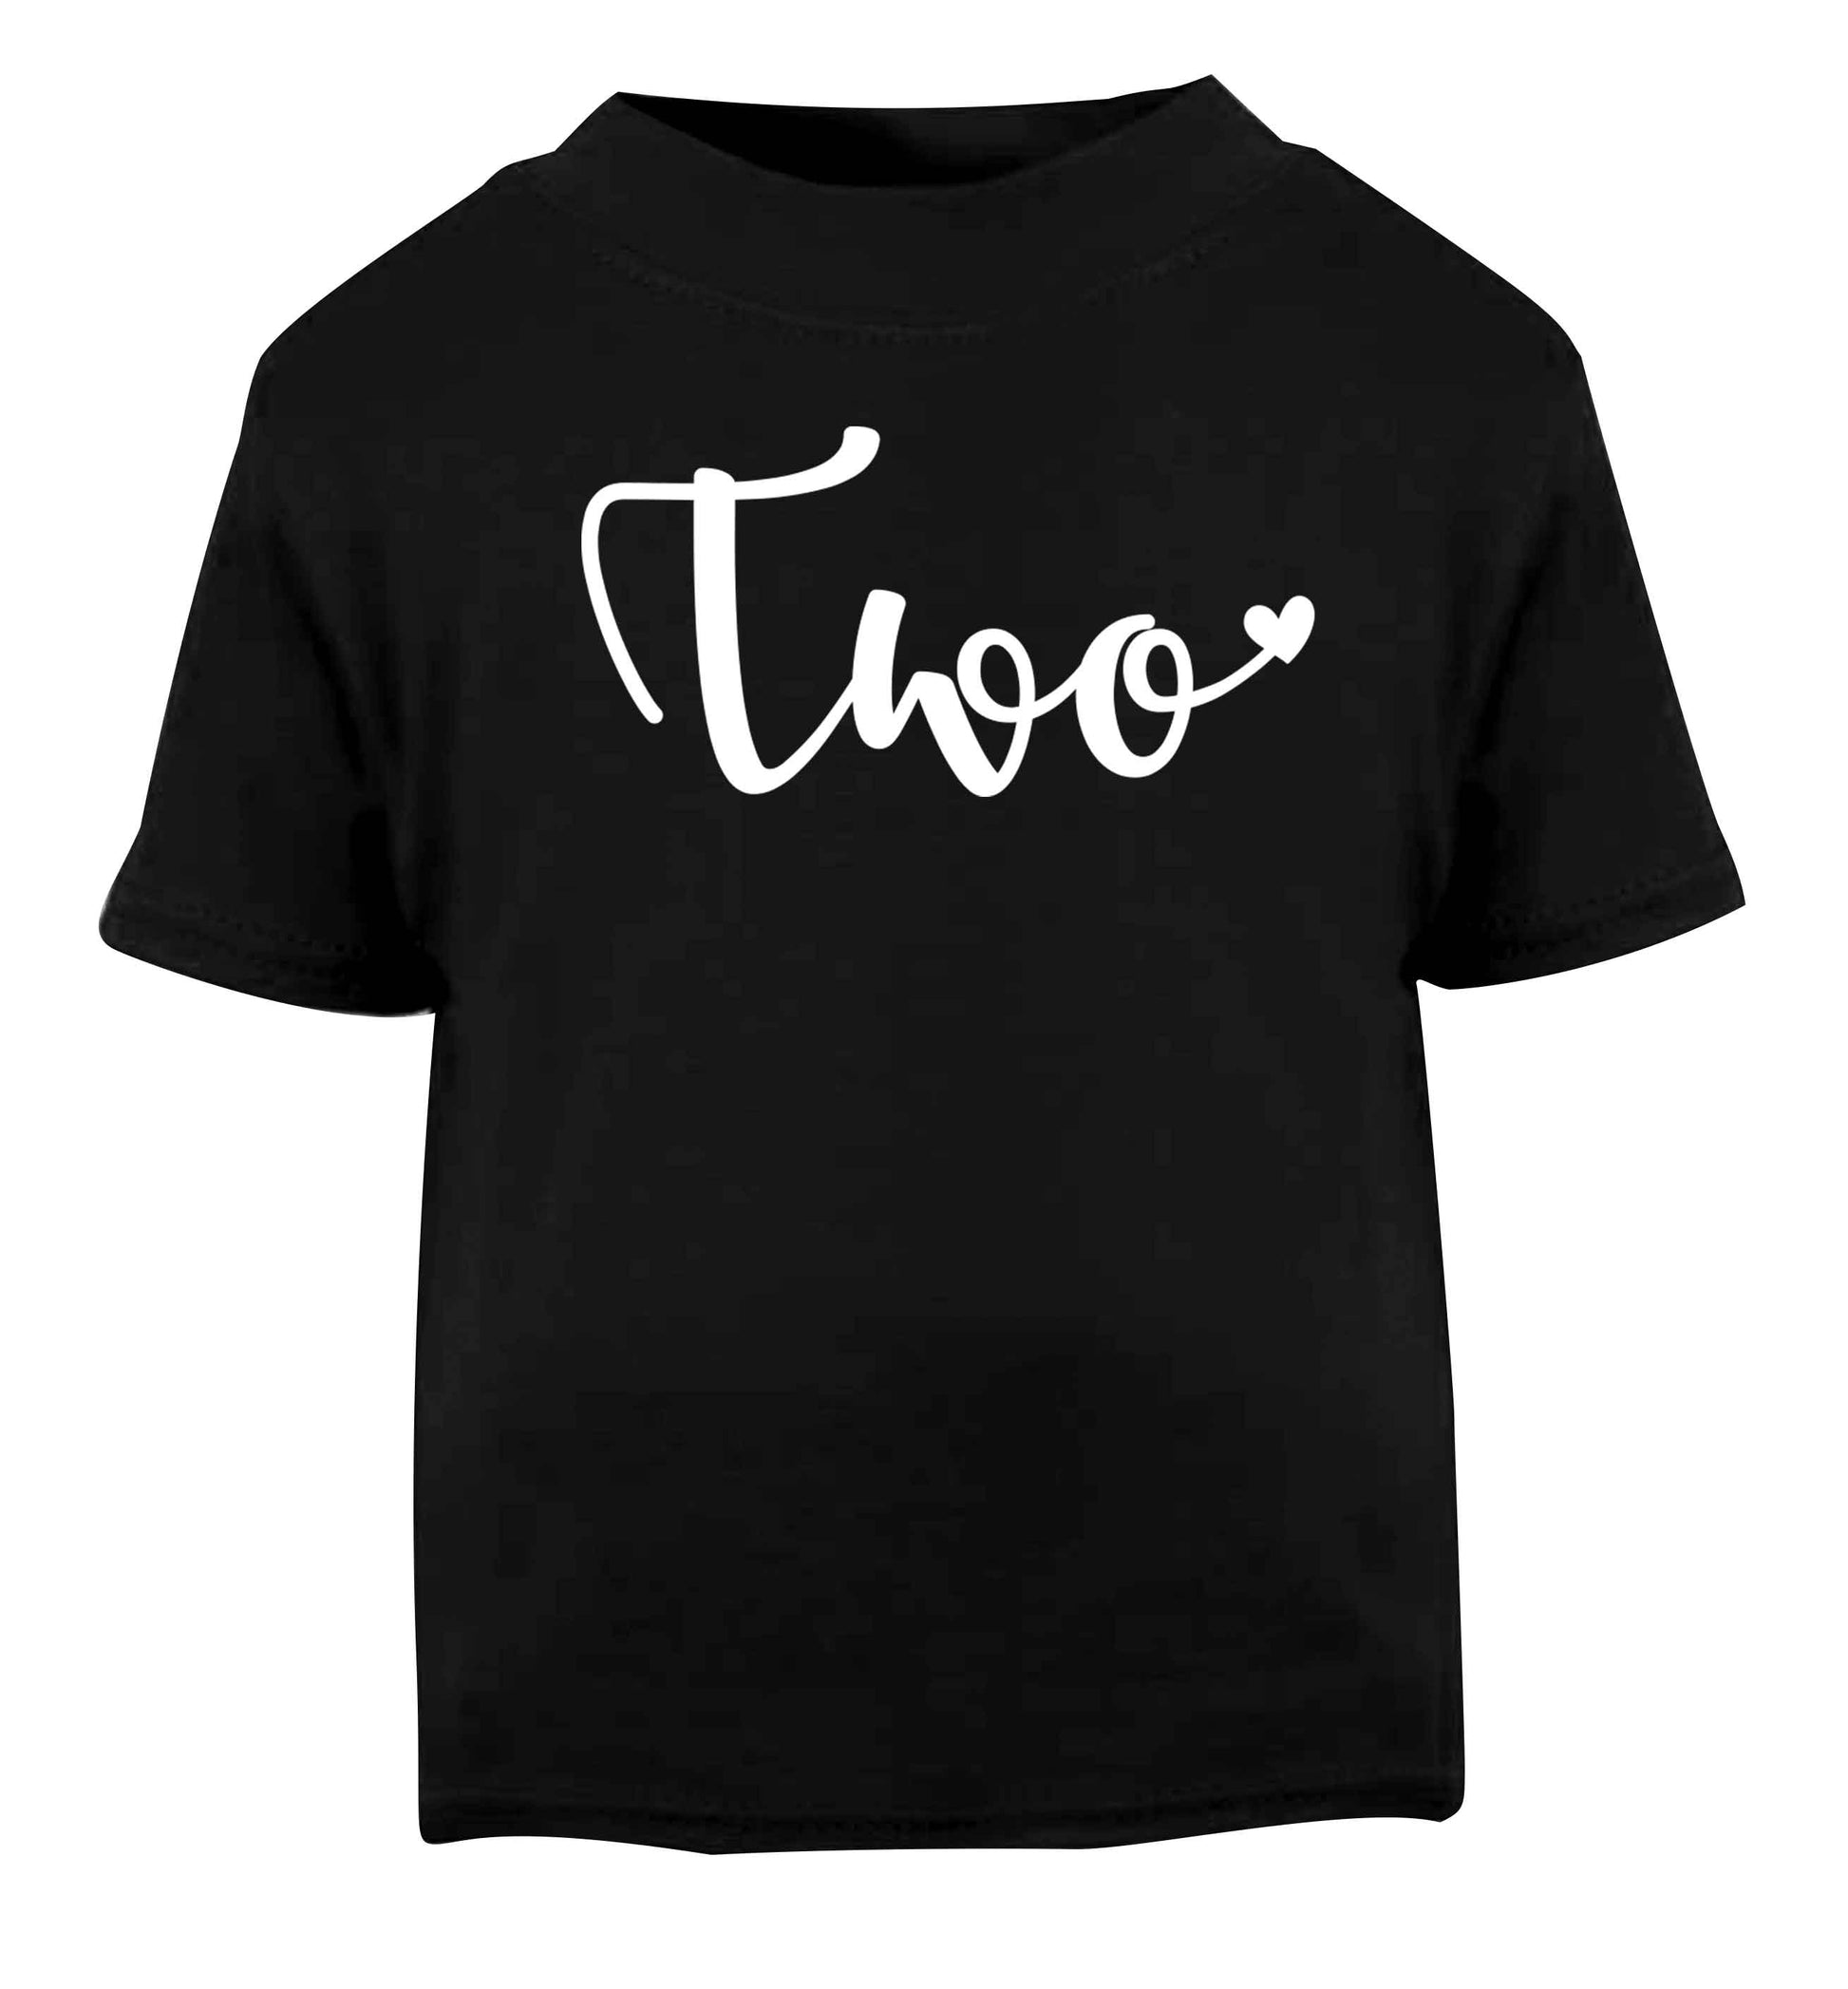 Two and Heart Black baby toddler Tshirt 2 years